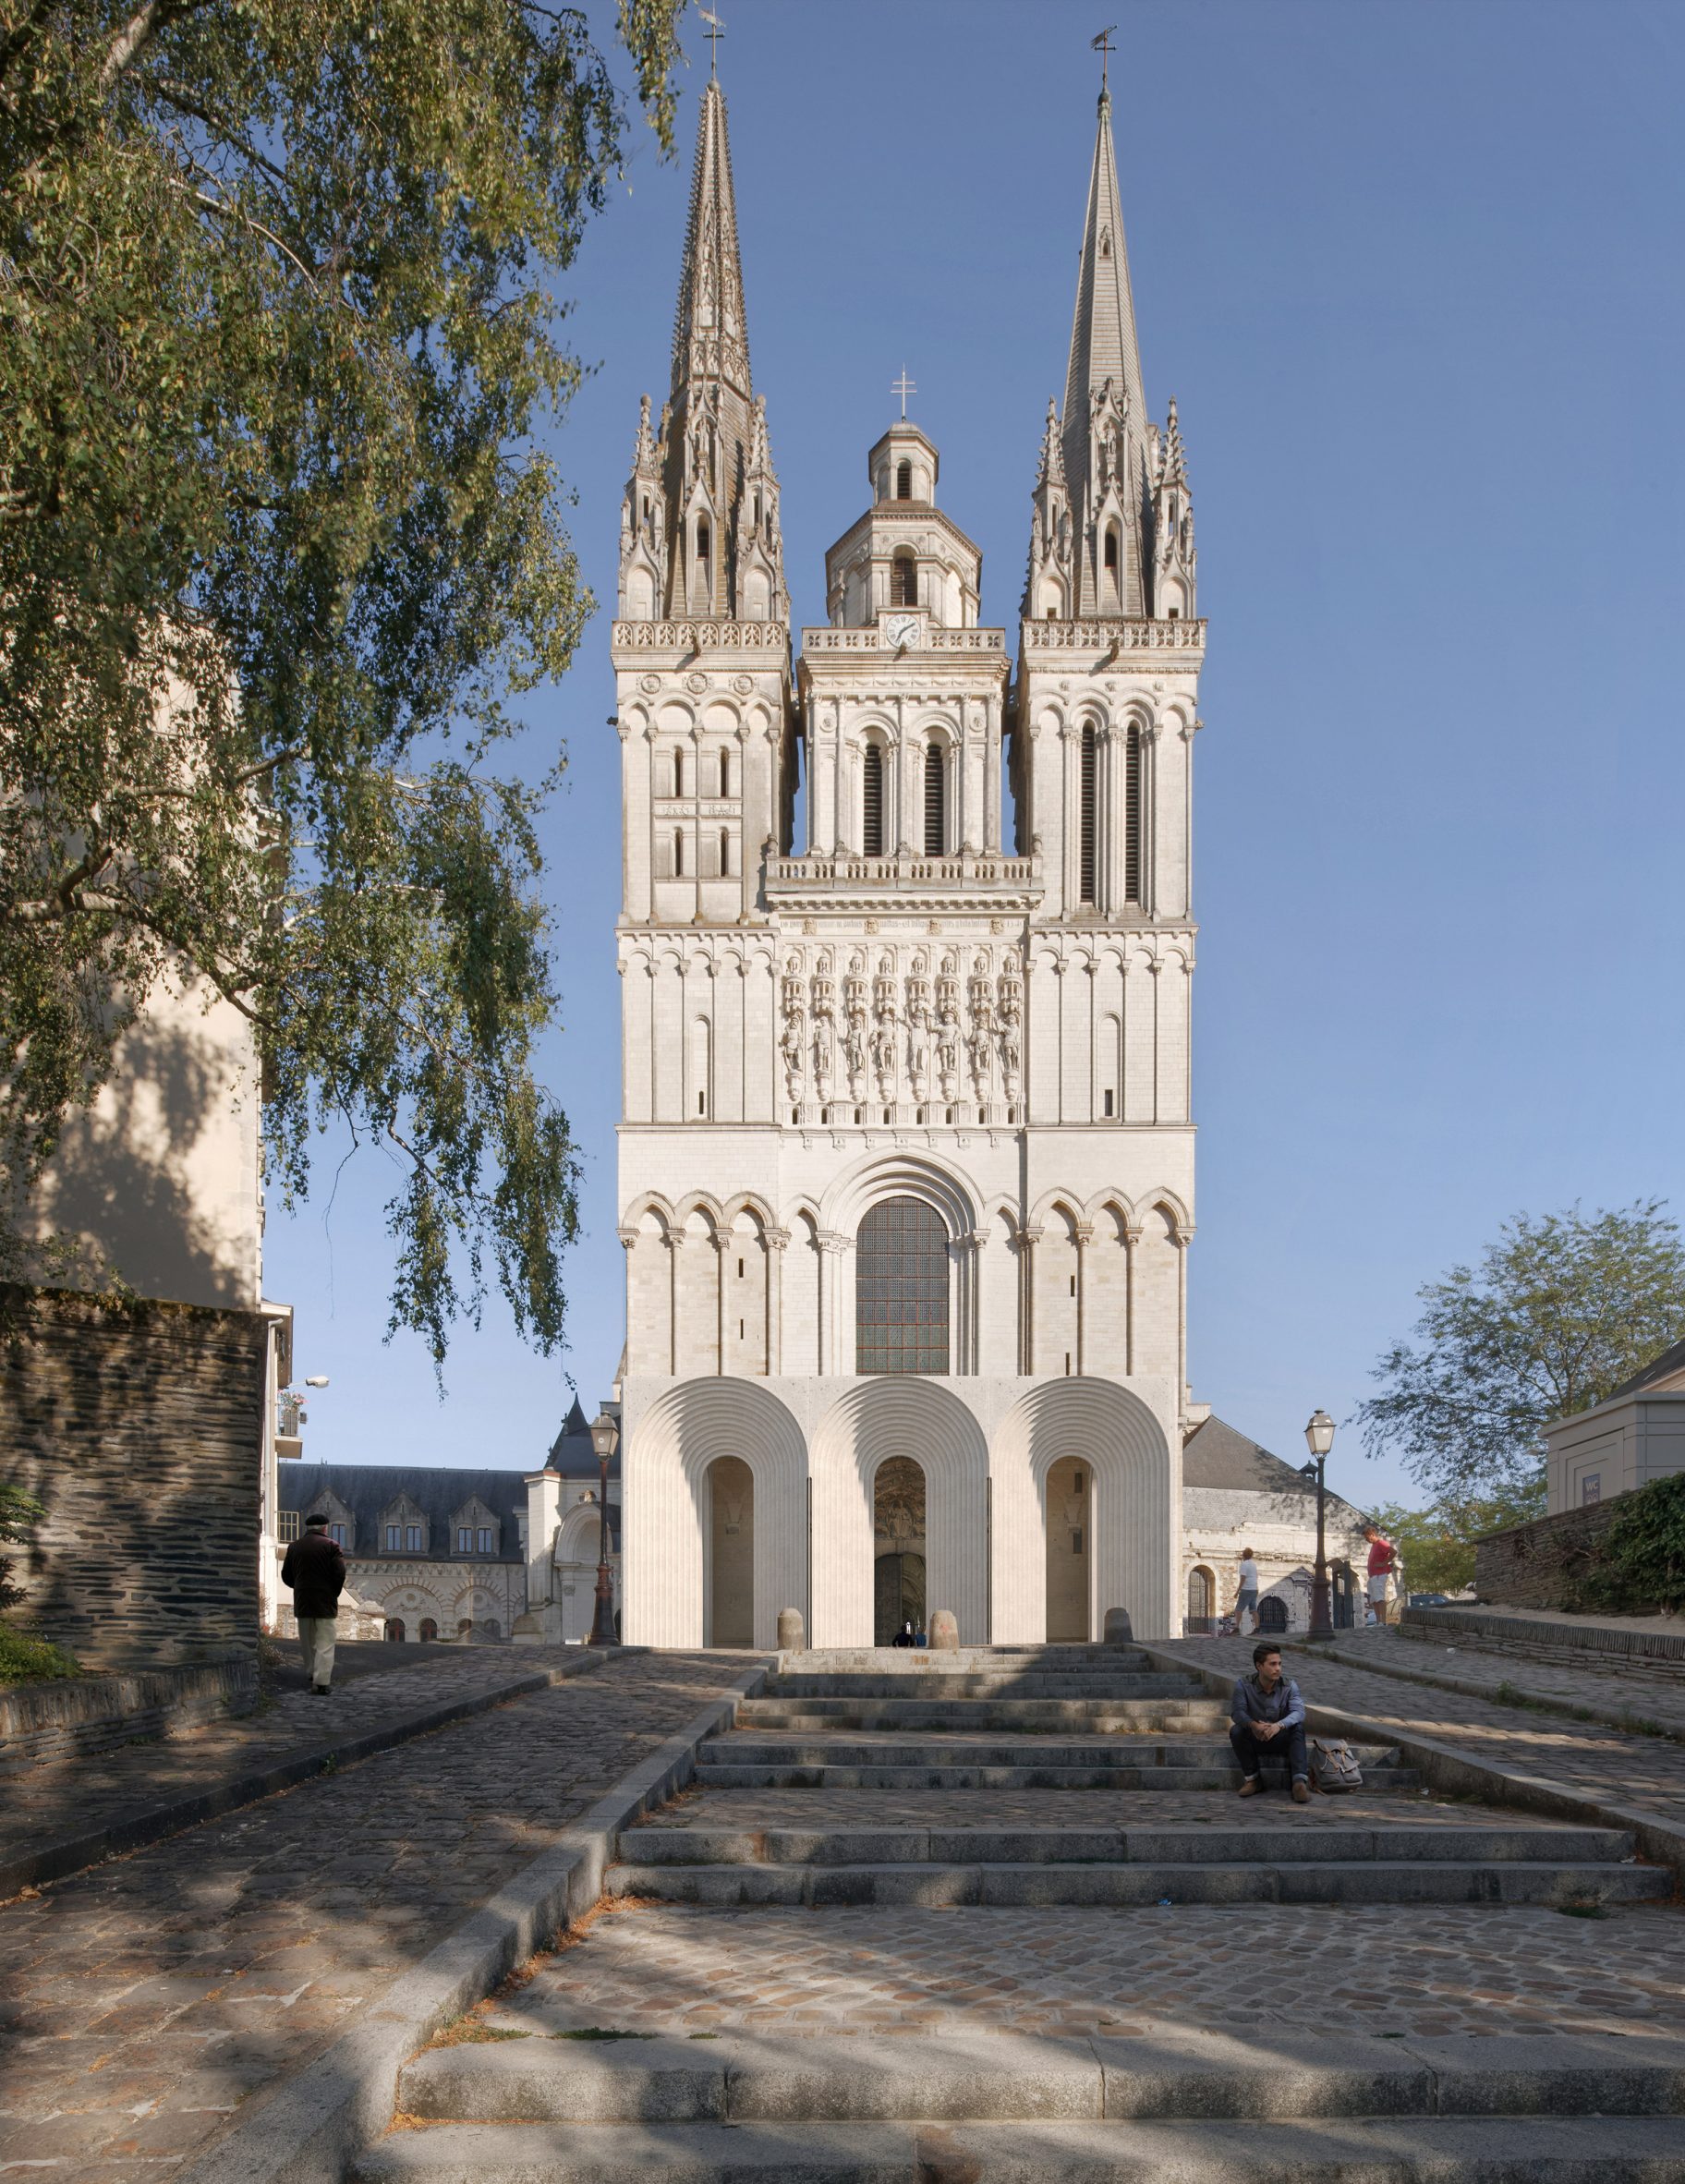 Kengo Kuma's design for Angers Cathedral in France